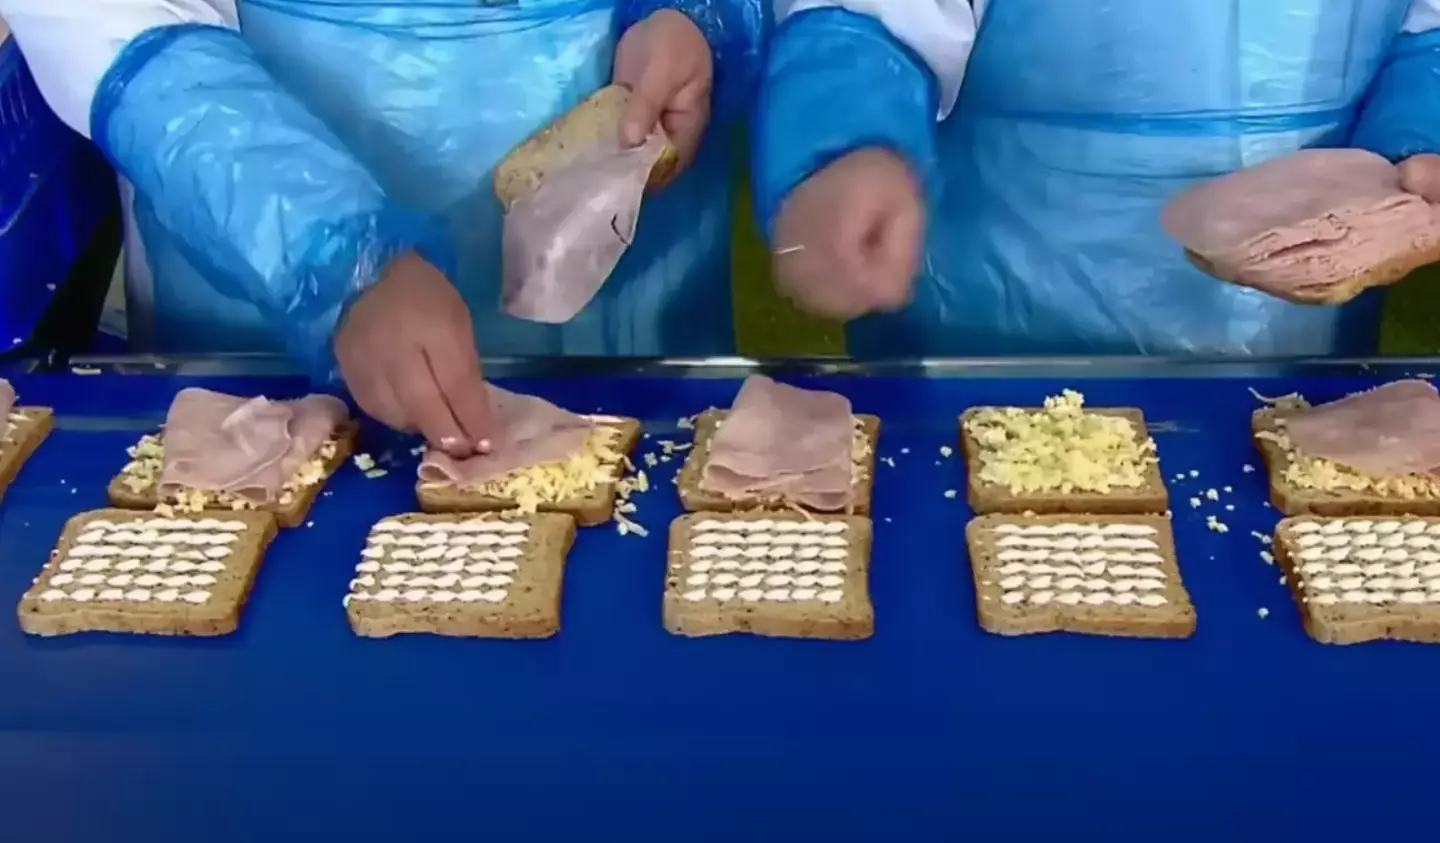 The documentary shows workers adding fillings to the sandwiches for one of the processes.